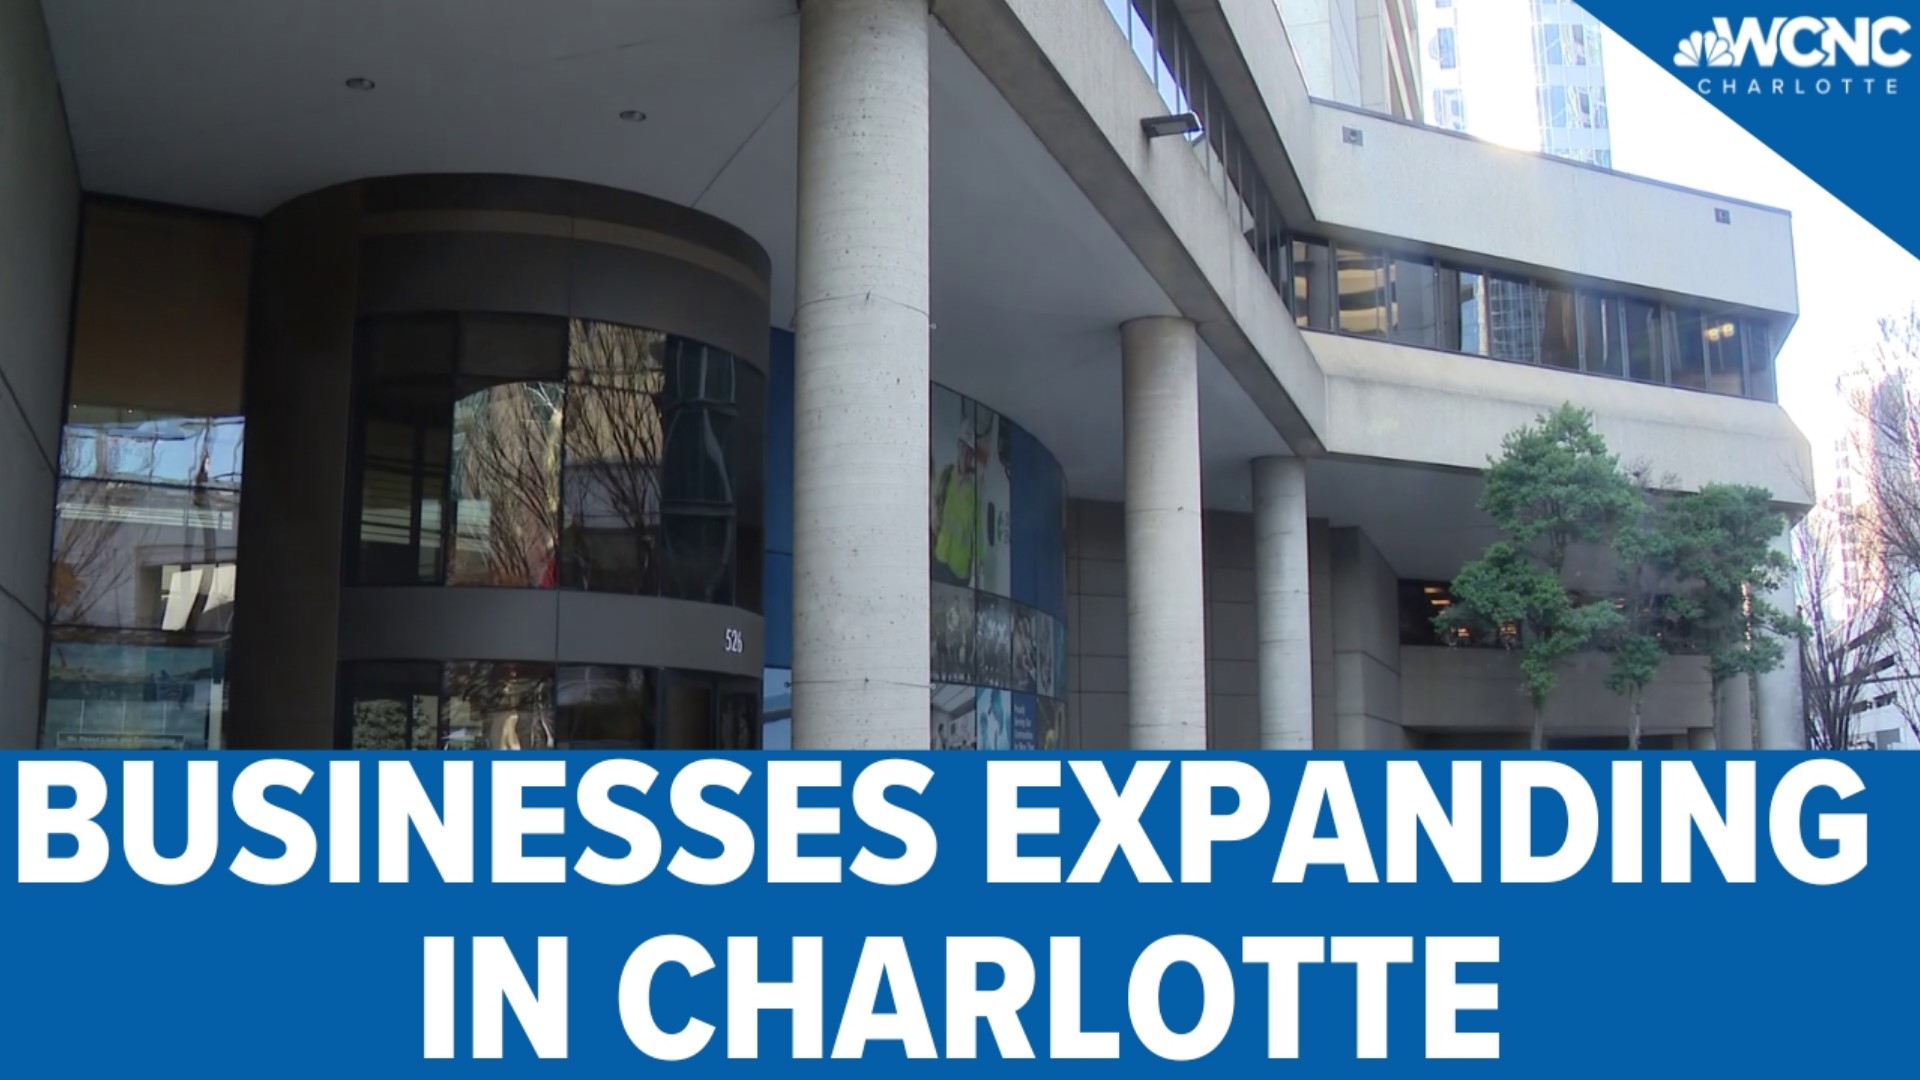 Businesses continue to grow, and they're choosing Charlotte for their developments.